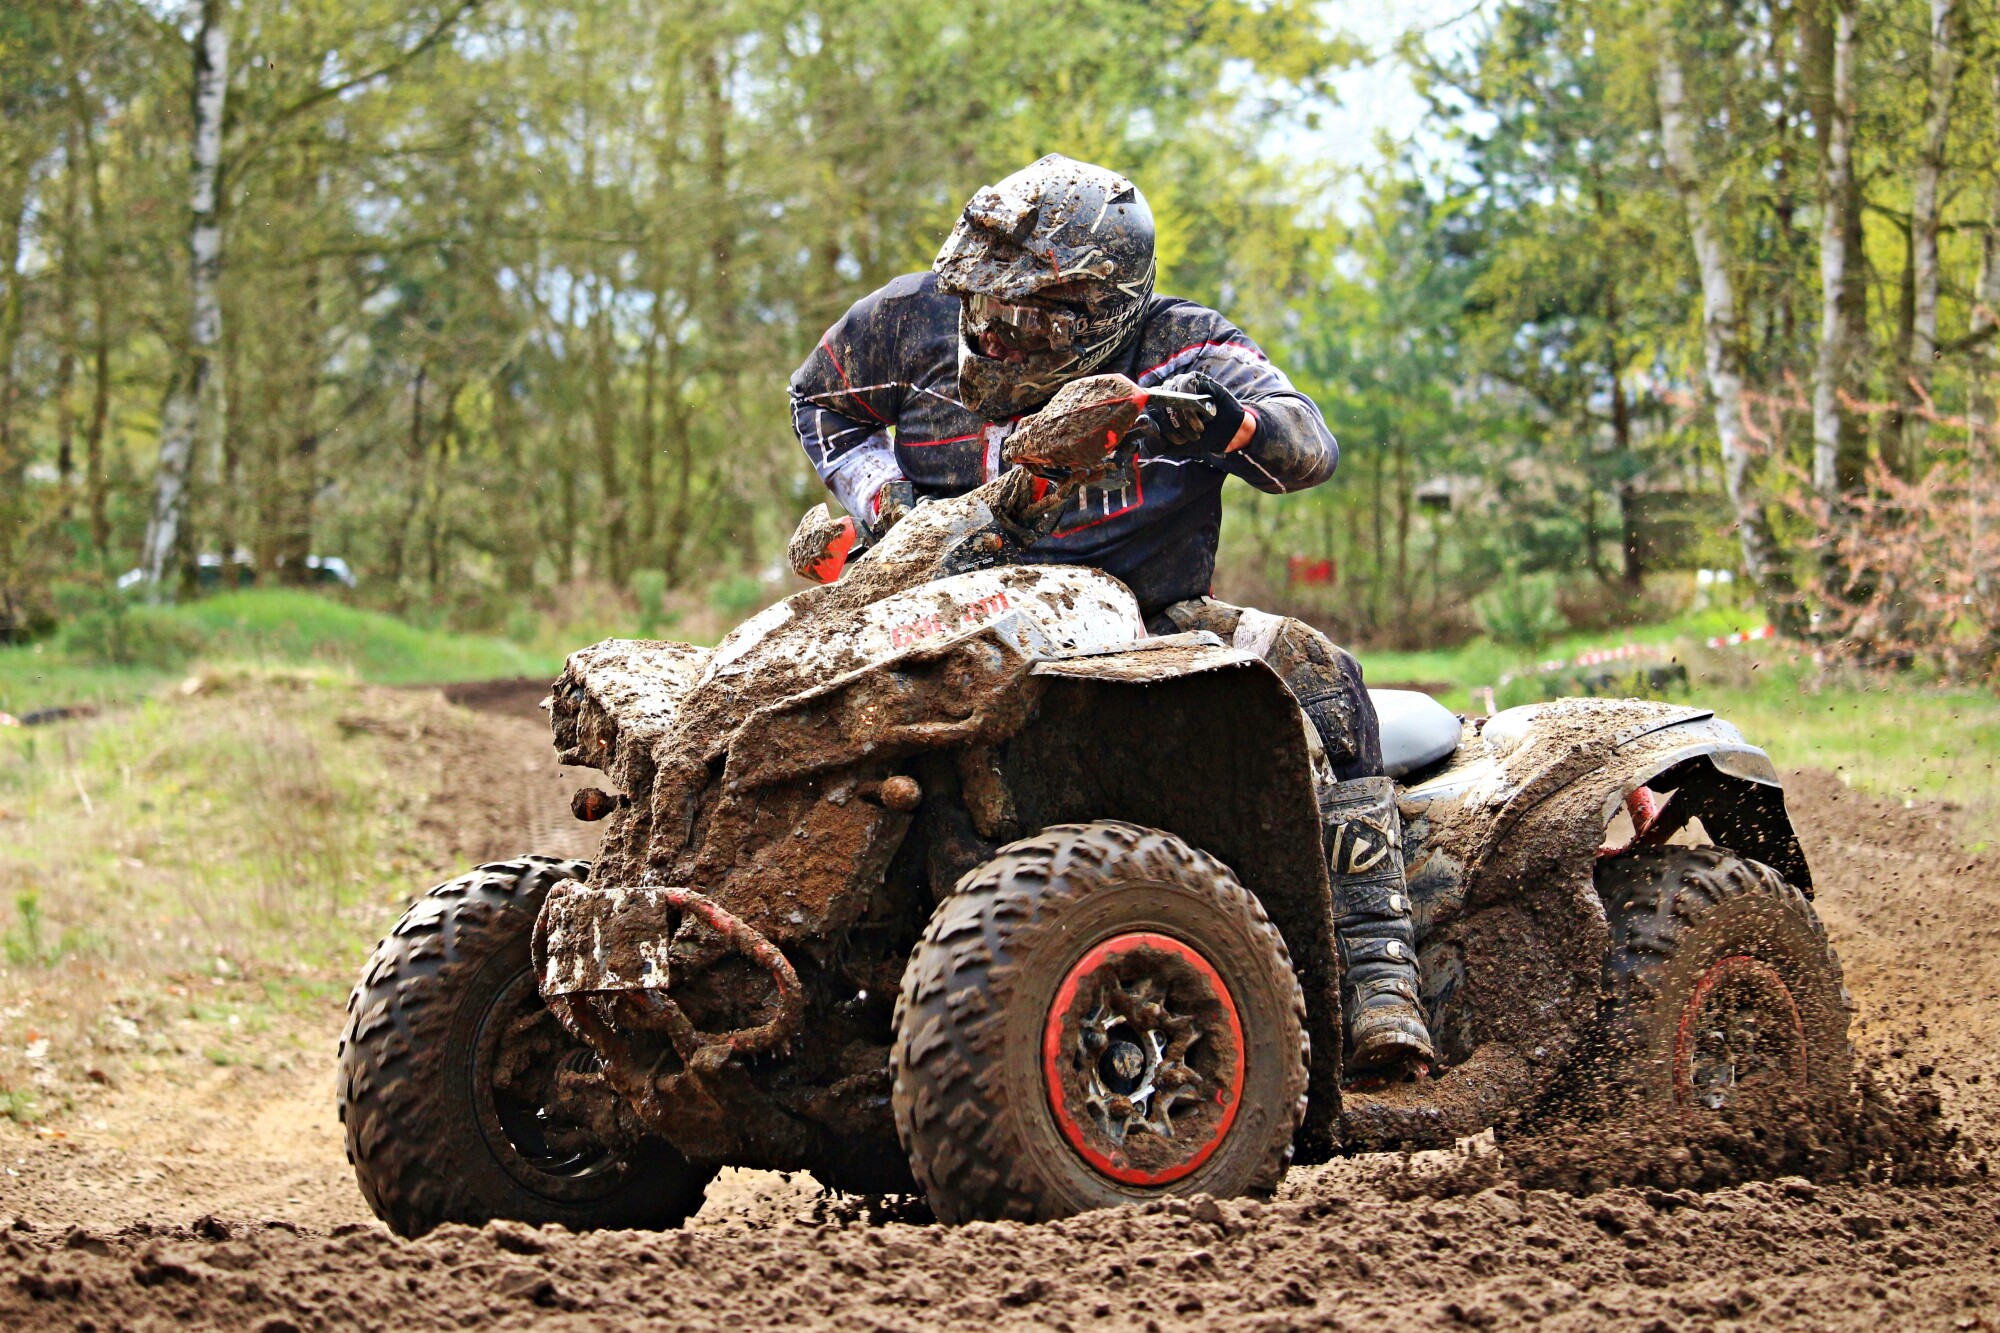 ATV Motorcycles for Beginners.